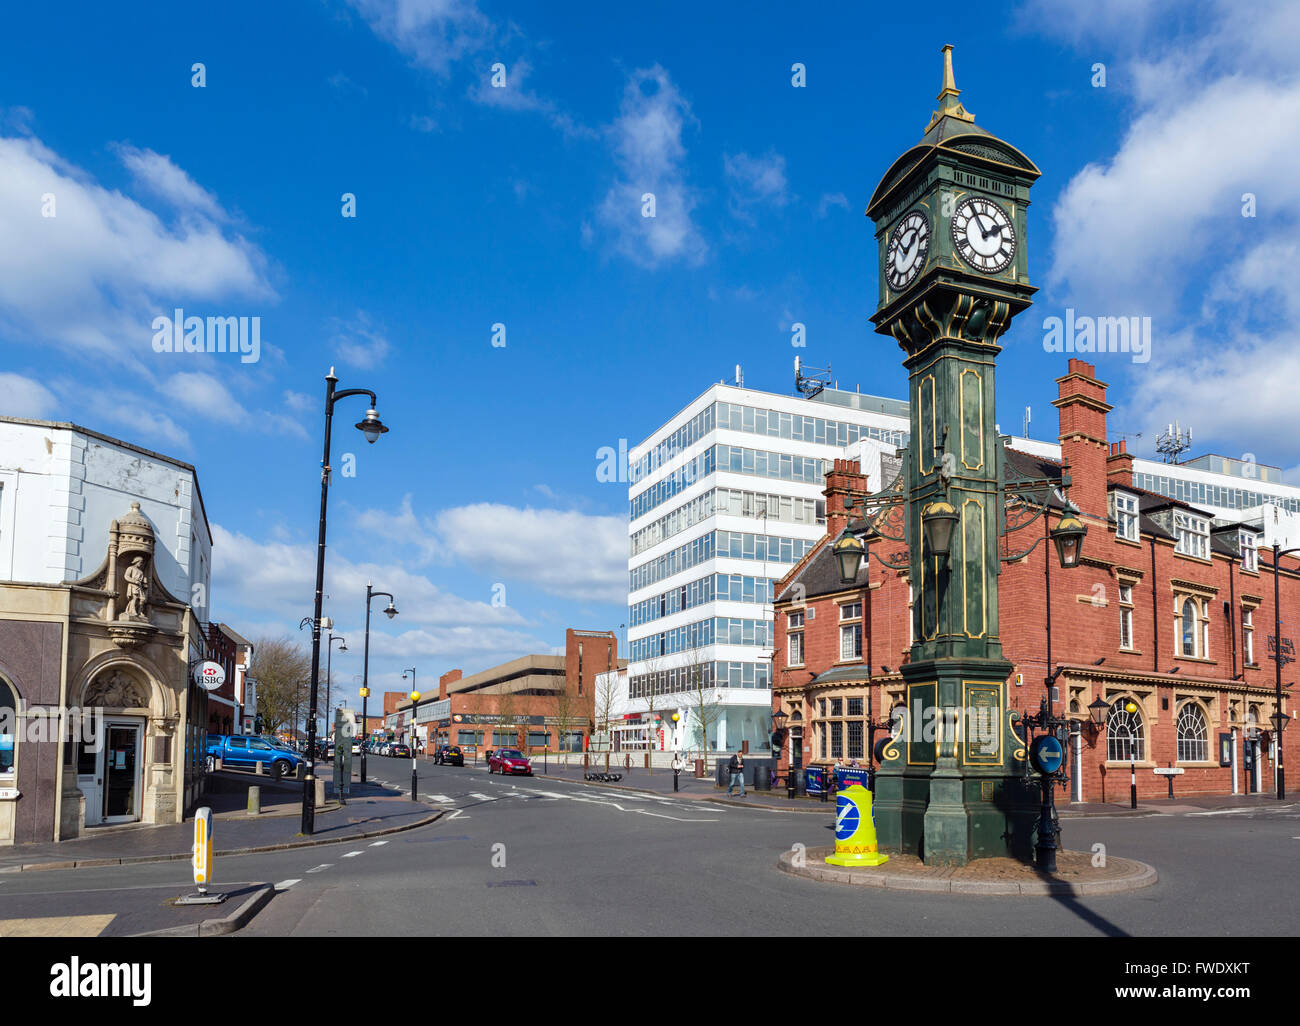 The Chamberlain Clock in the centre of the Jewellery Quarter, Birmingham, West Midlands, England, UK Stock Photo